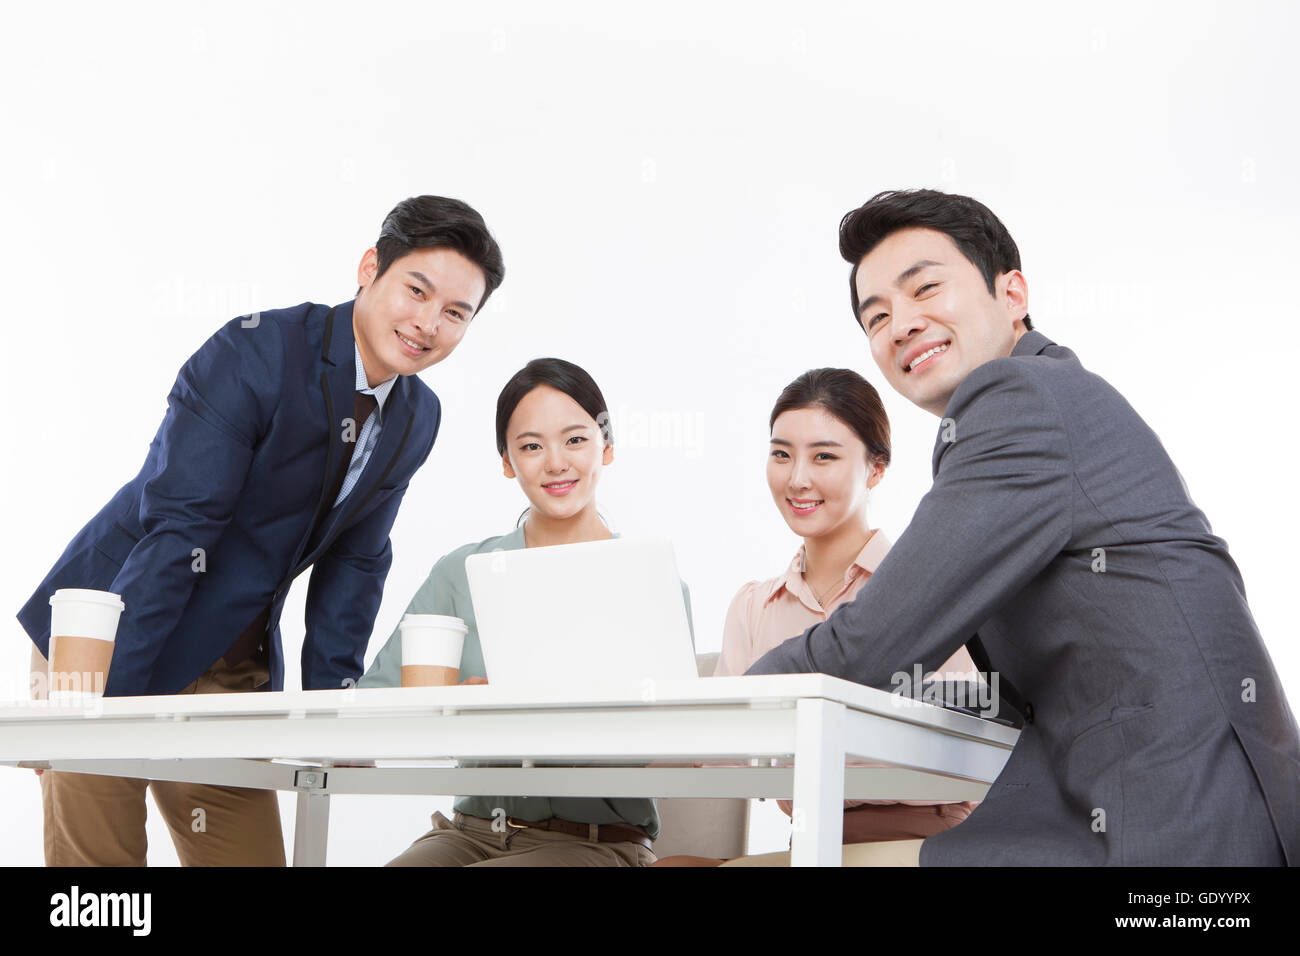 Business people with a notebook computer smiling at front Stock Photo